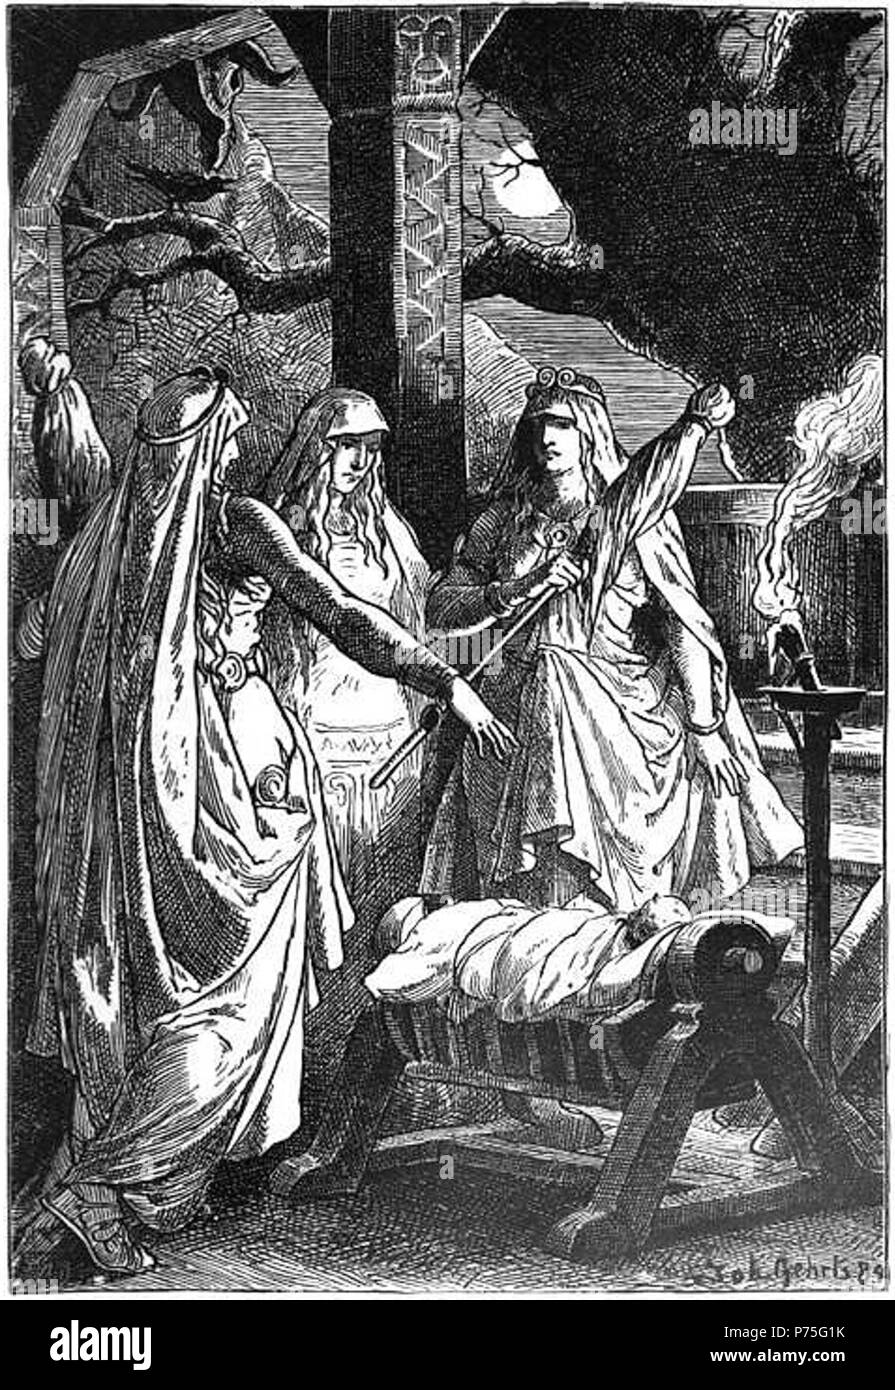 English: 'Die Nornen' (1889) by Johannes Gehrts. The three norns surround a child. 1889 judging by inscription on work, published in 1901. 16 Die Nornen (1889) by Johannes Gehrts Stock Photo